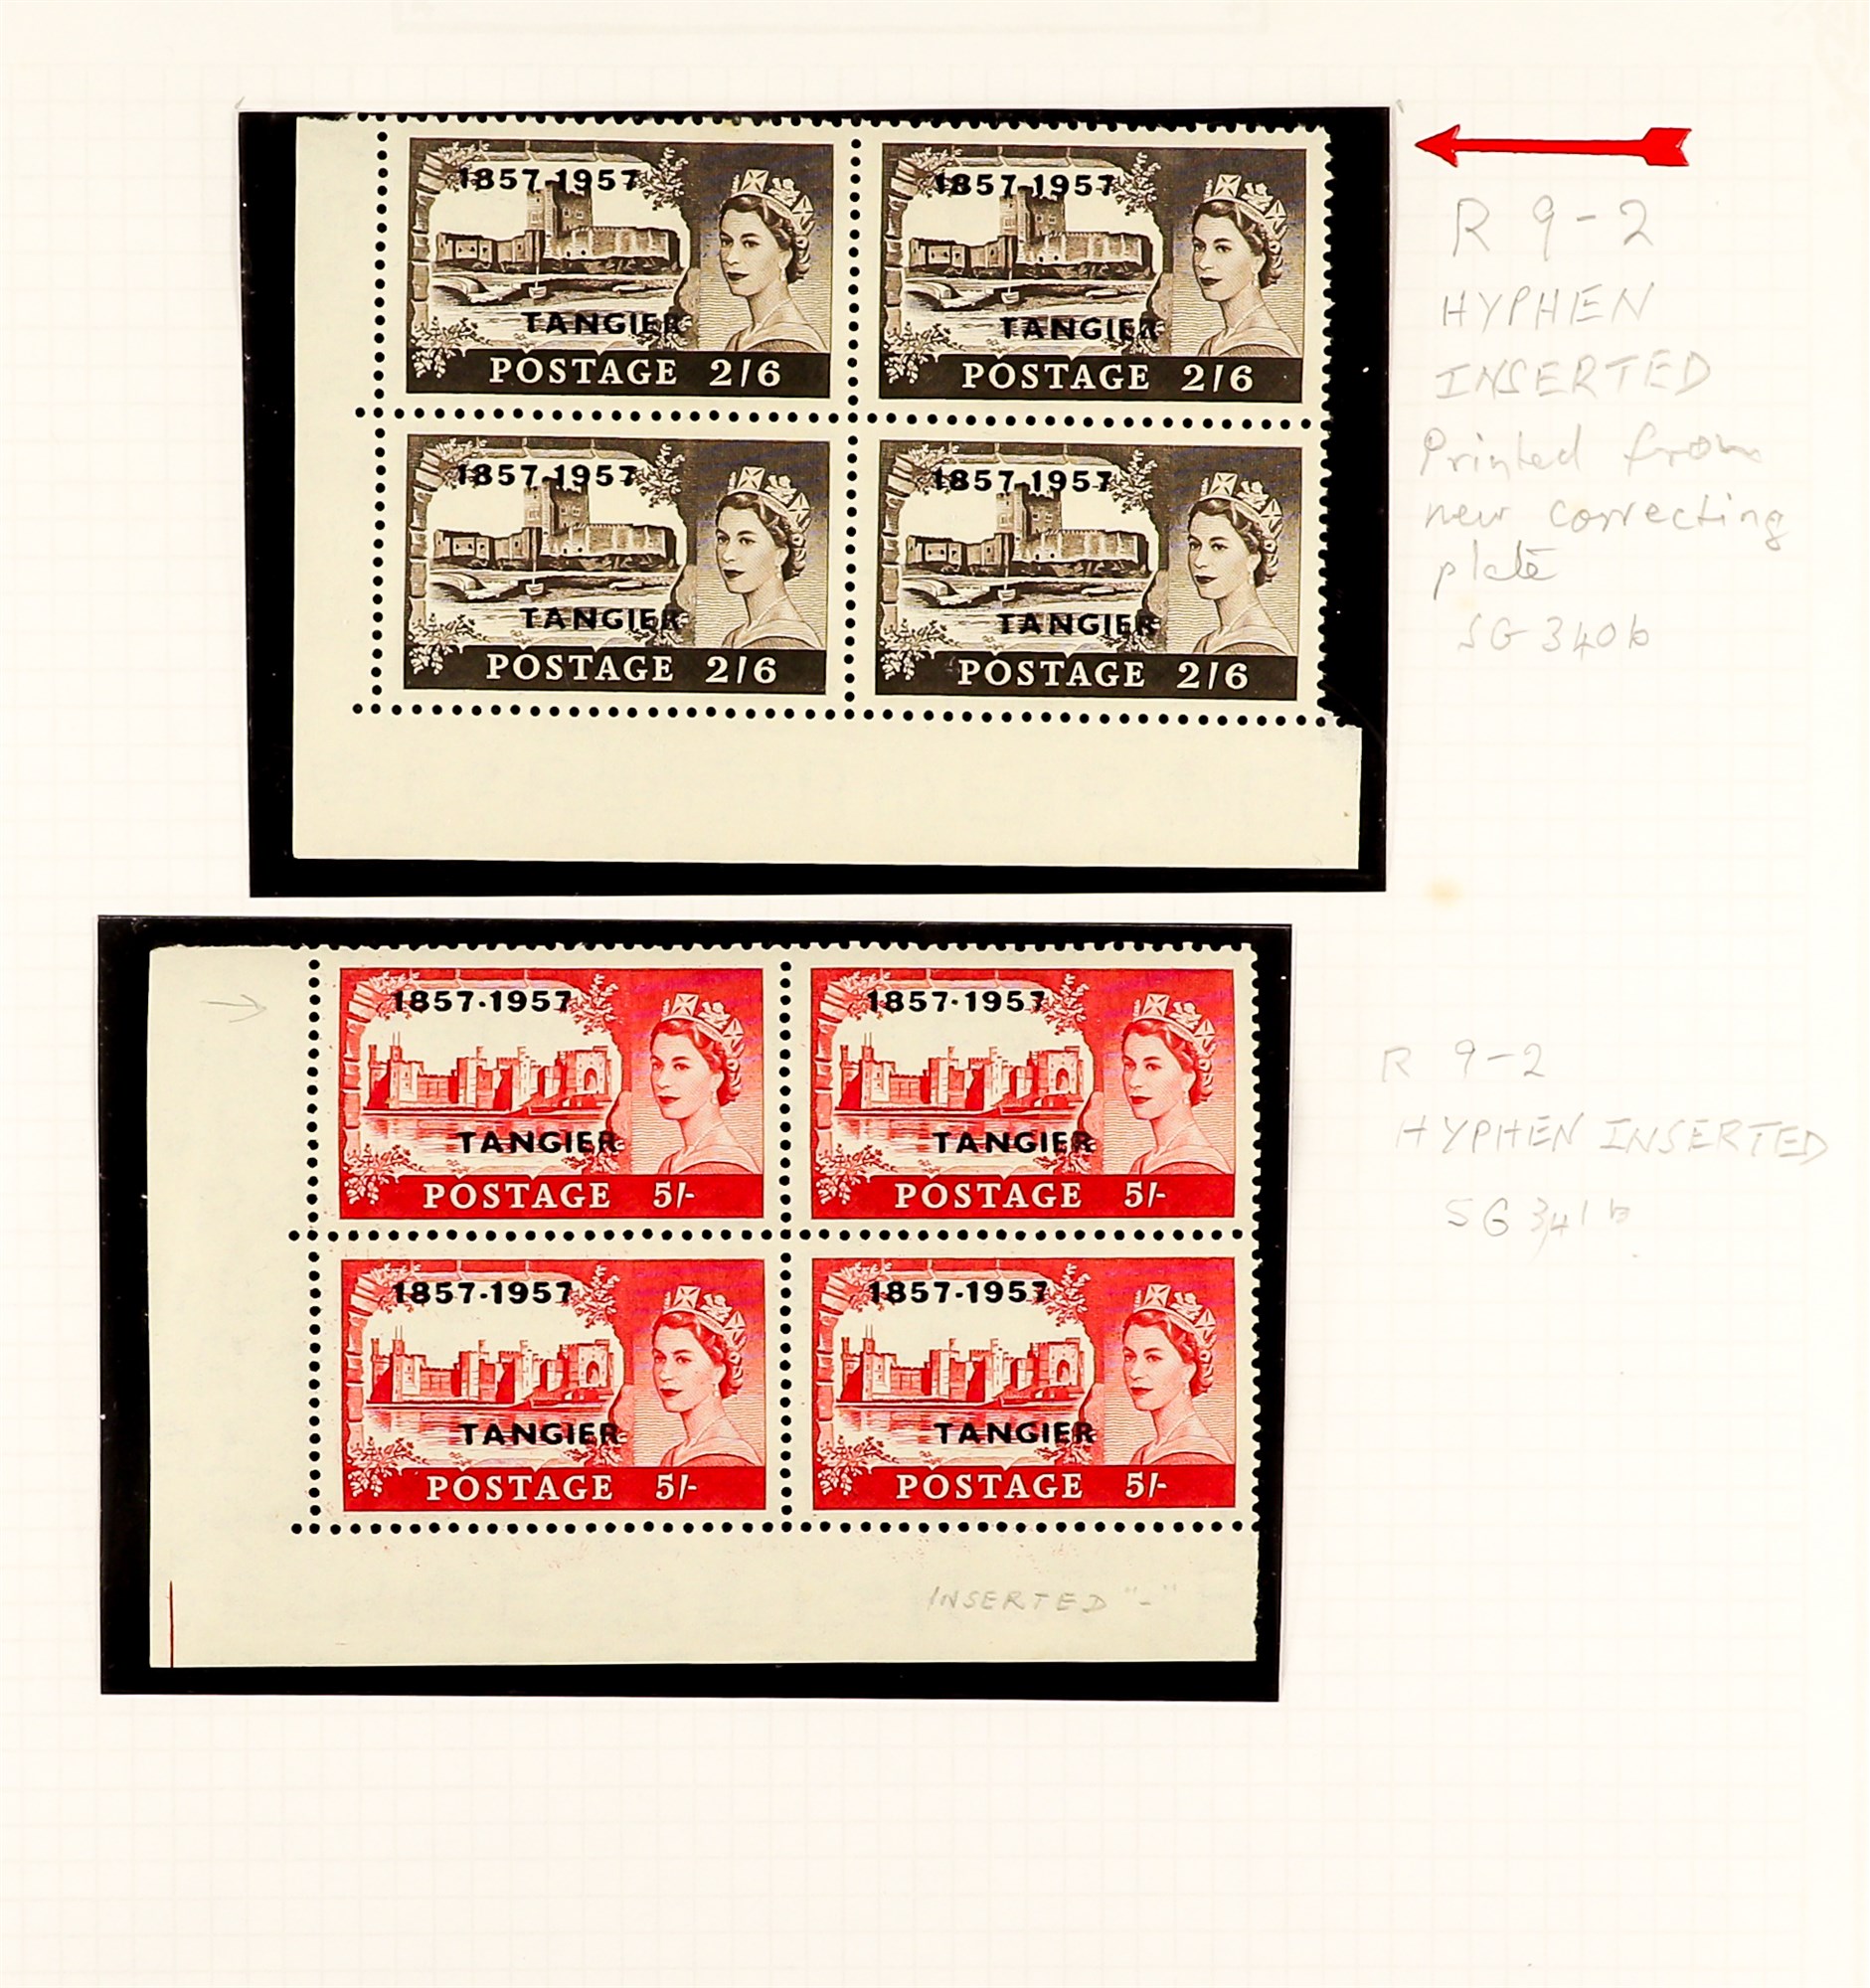 MOROCCO AGENCIES TANGIER 1927 - 1957 collection of mint and never hinged mint stamps, many sets, - Image 6 of 6